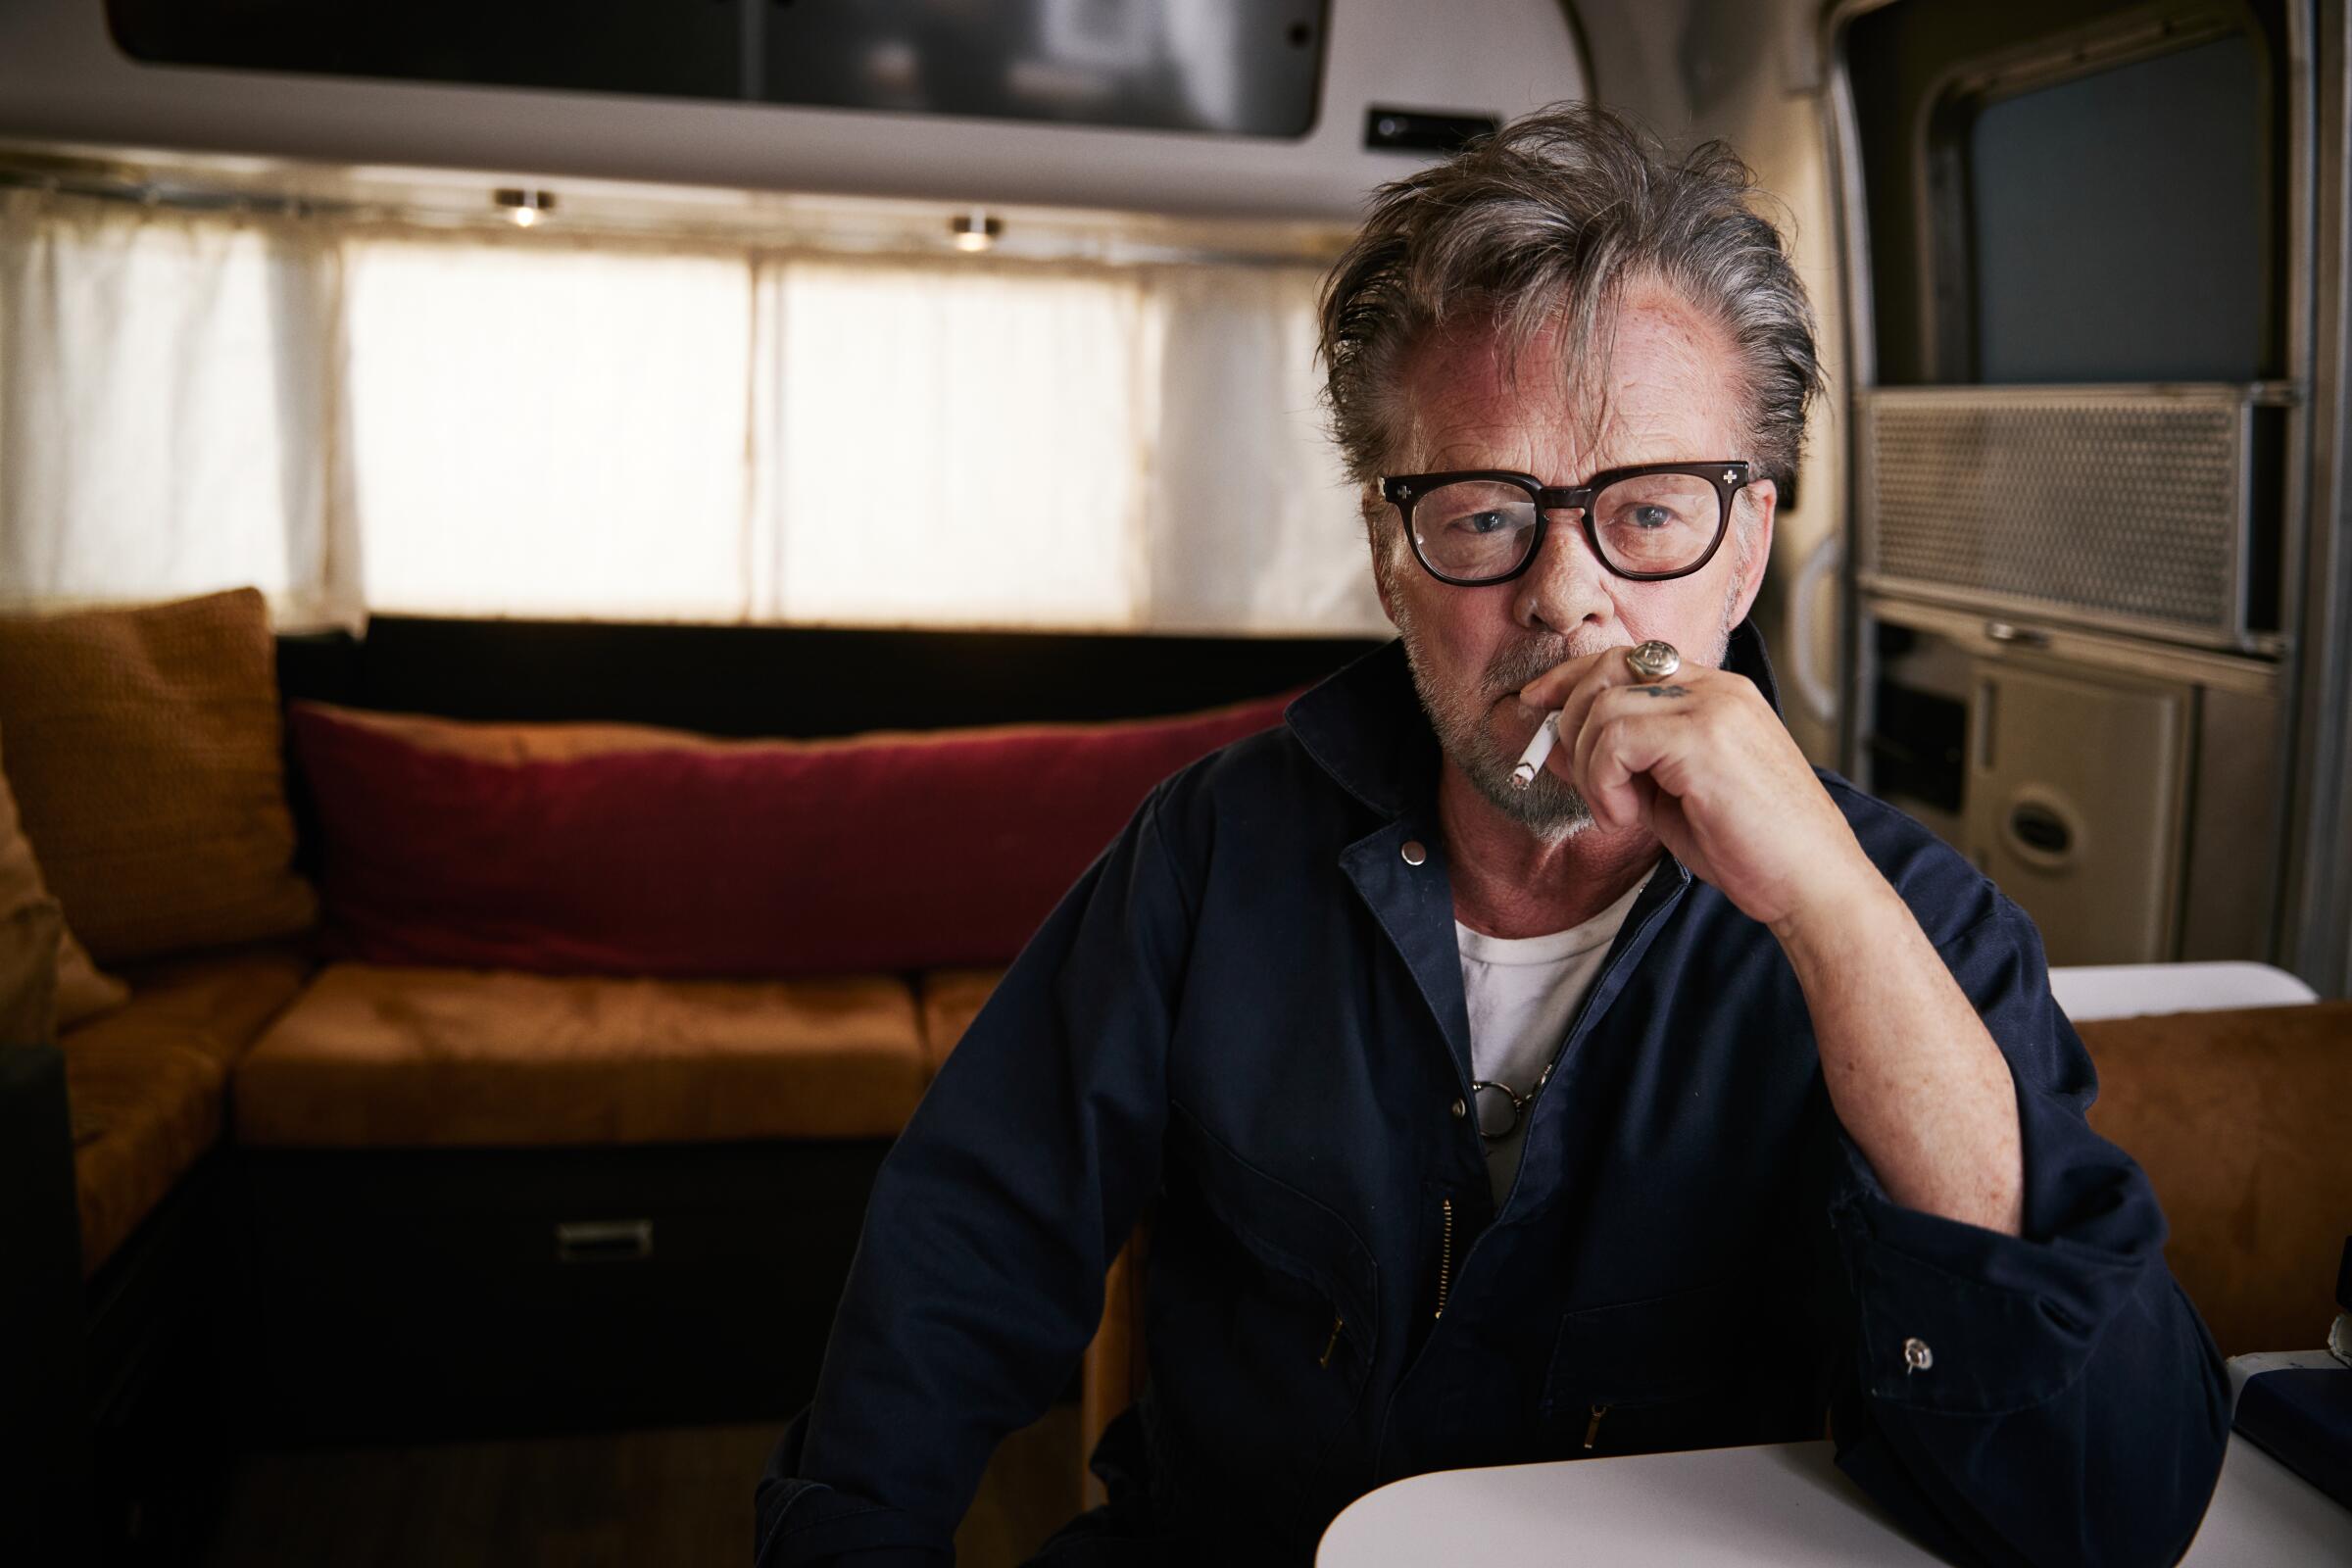 A man wearing glasses, smoking in a trailer.